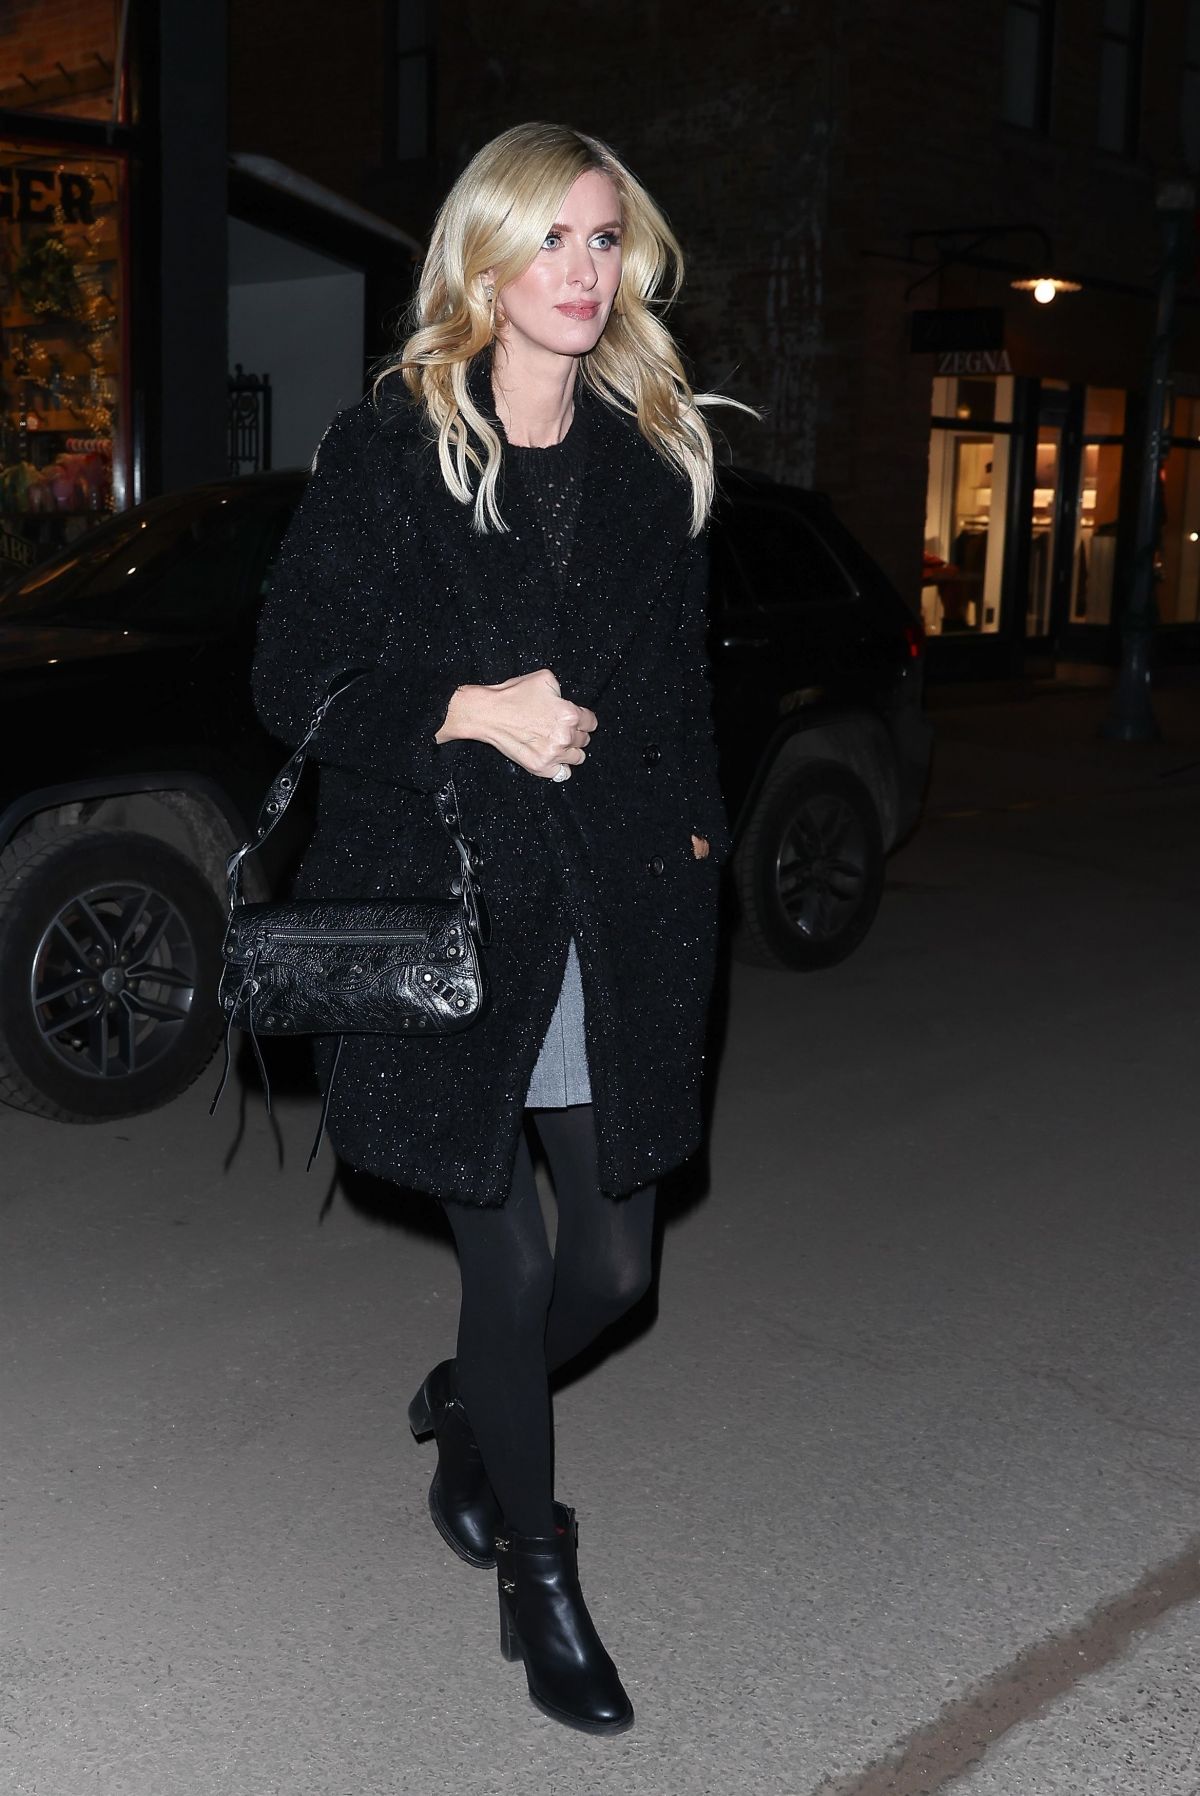 Nicky Hilton in Chic Black Outfit Leaving Kemo Sabe Aspen 4